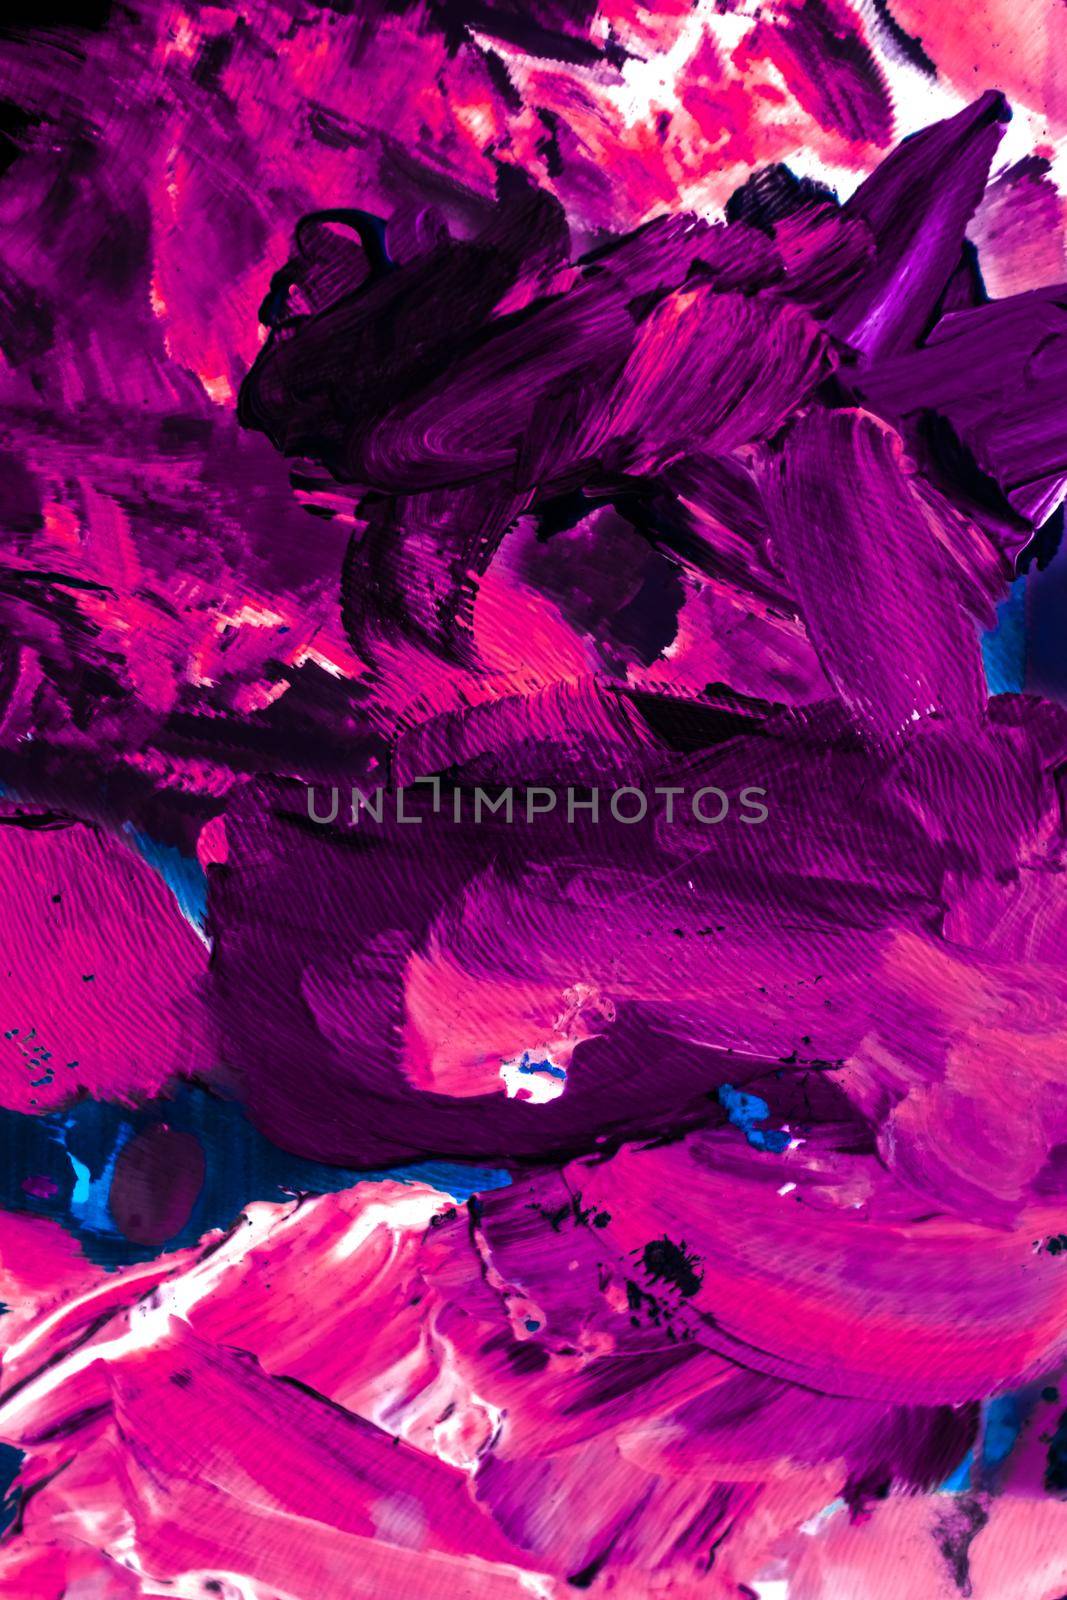 Abstract acrylic paint strokes, art brush flatlay background by Anneleven